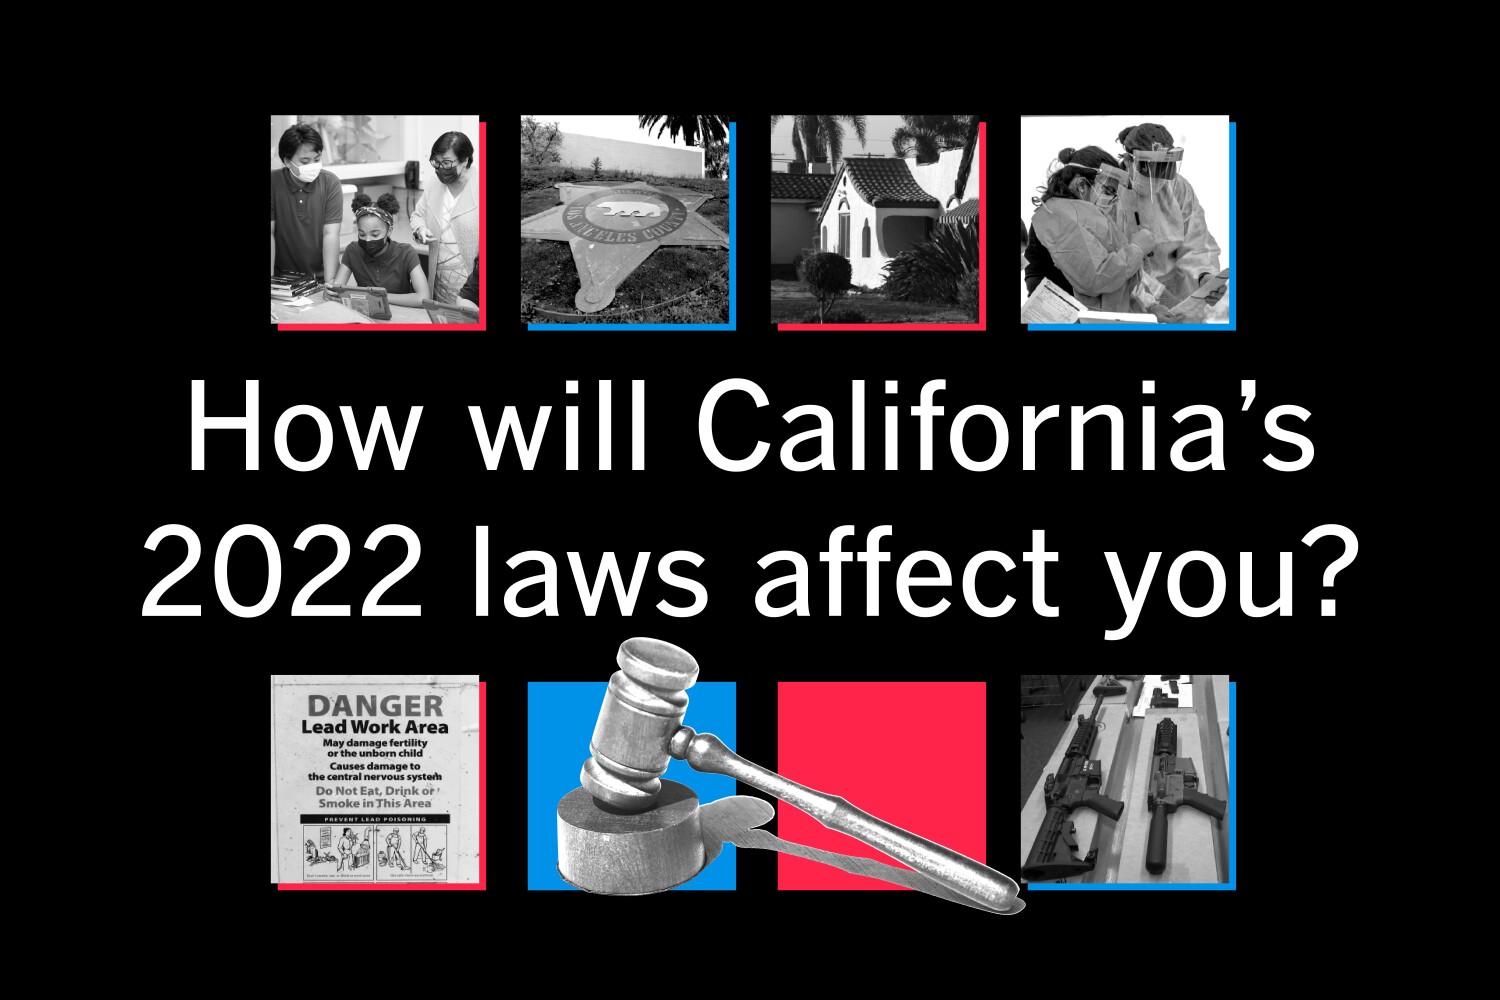 How will California's new laws affect you?